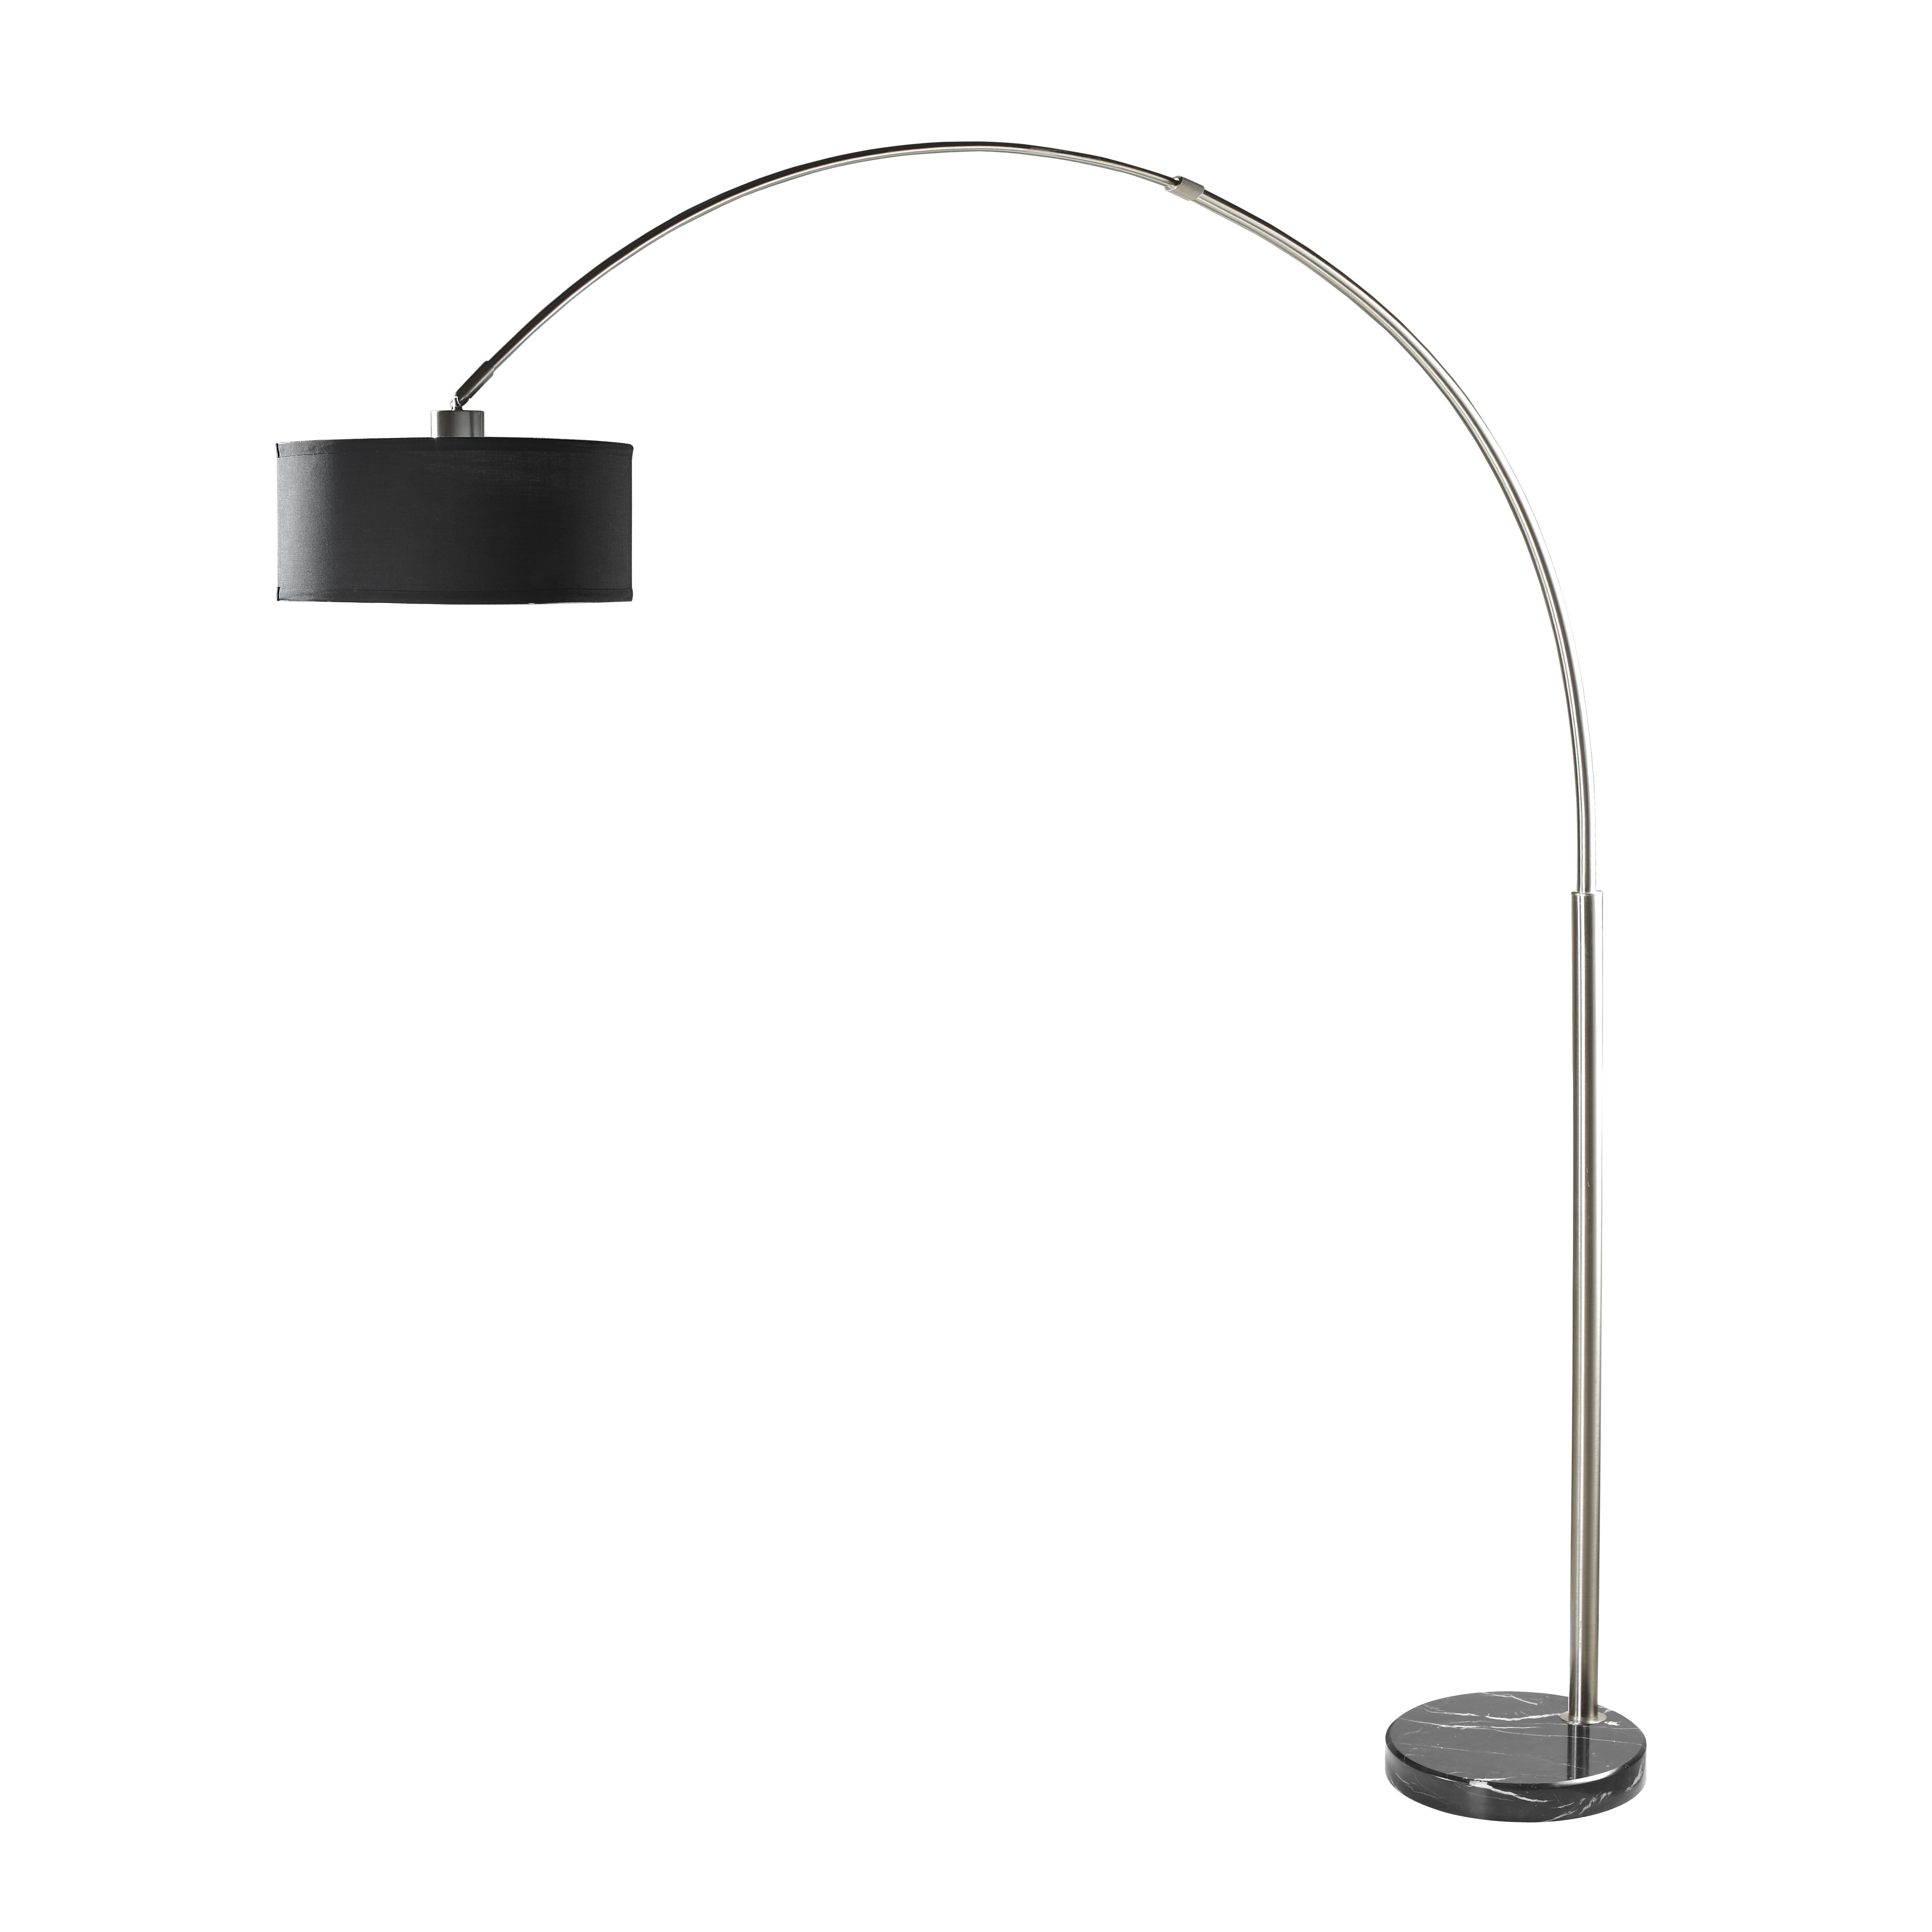 Flooring Arc Floor Lamp In Black Color Contemporary Arch within dimensions 4830 X 4830